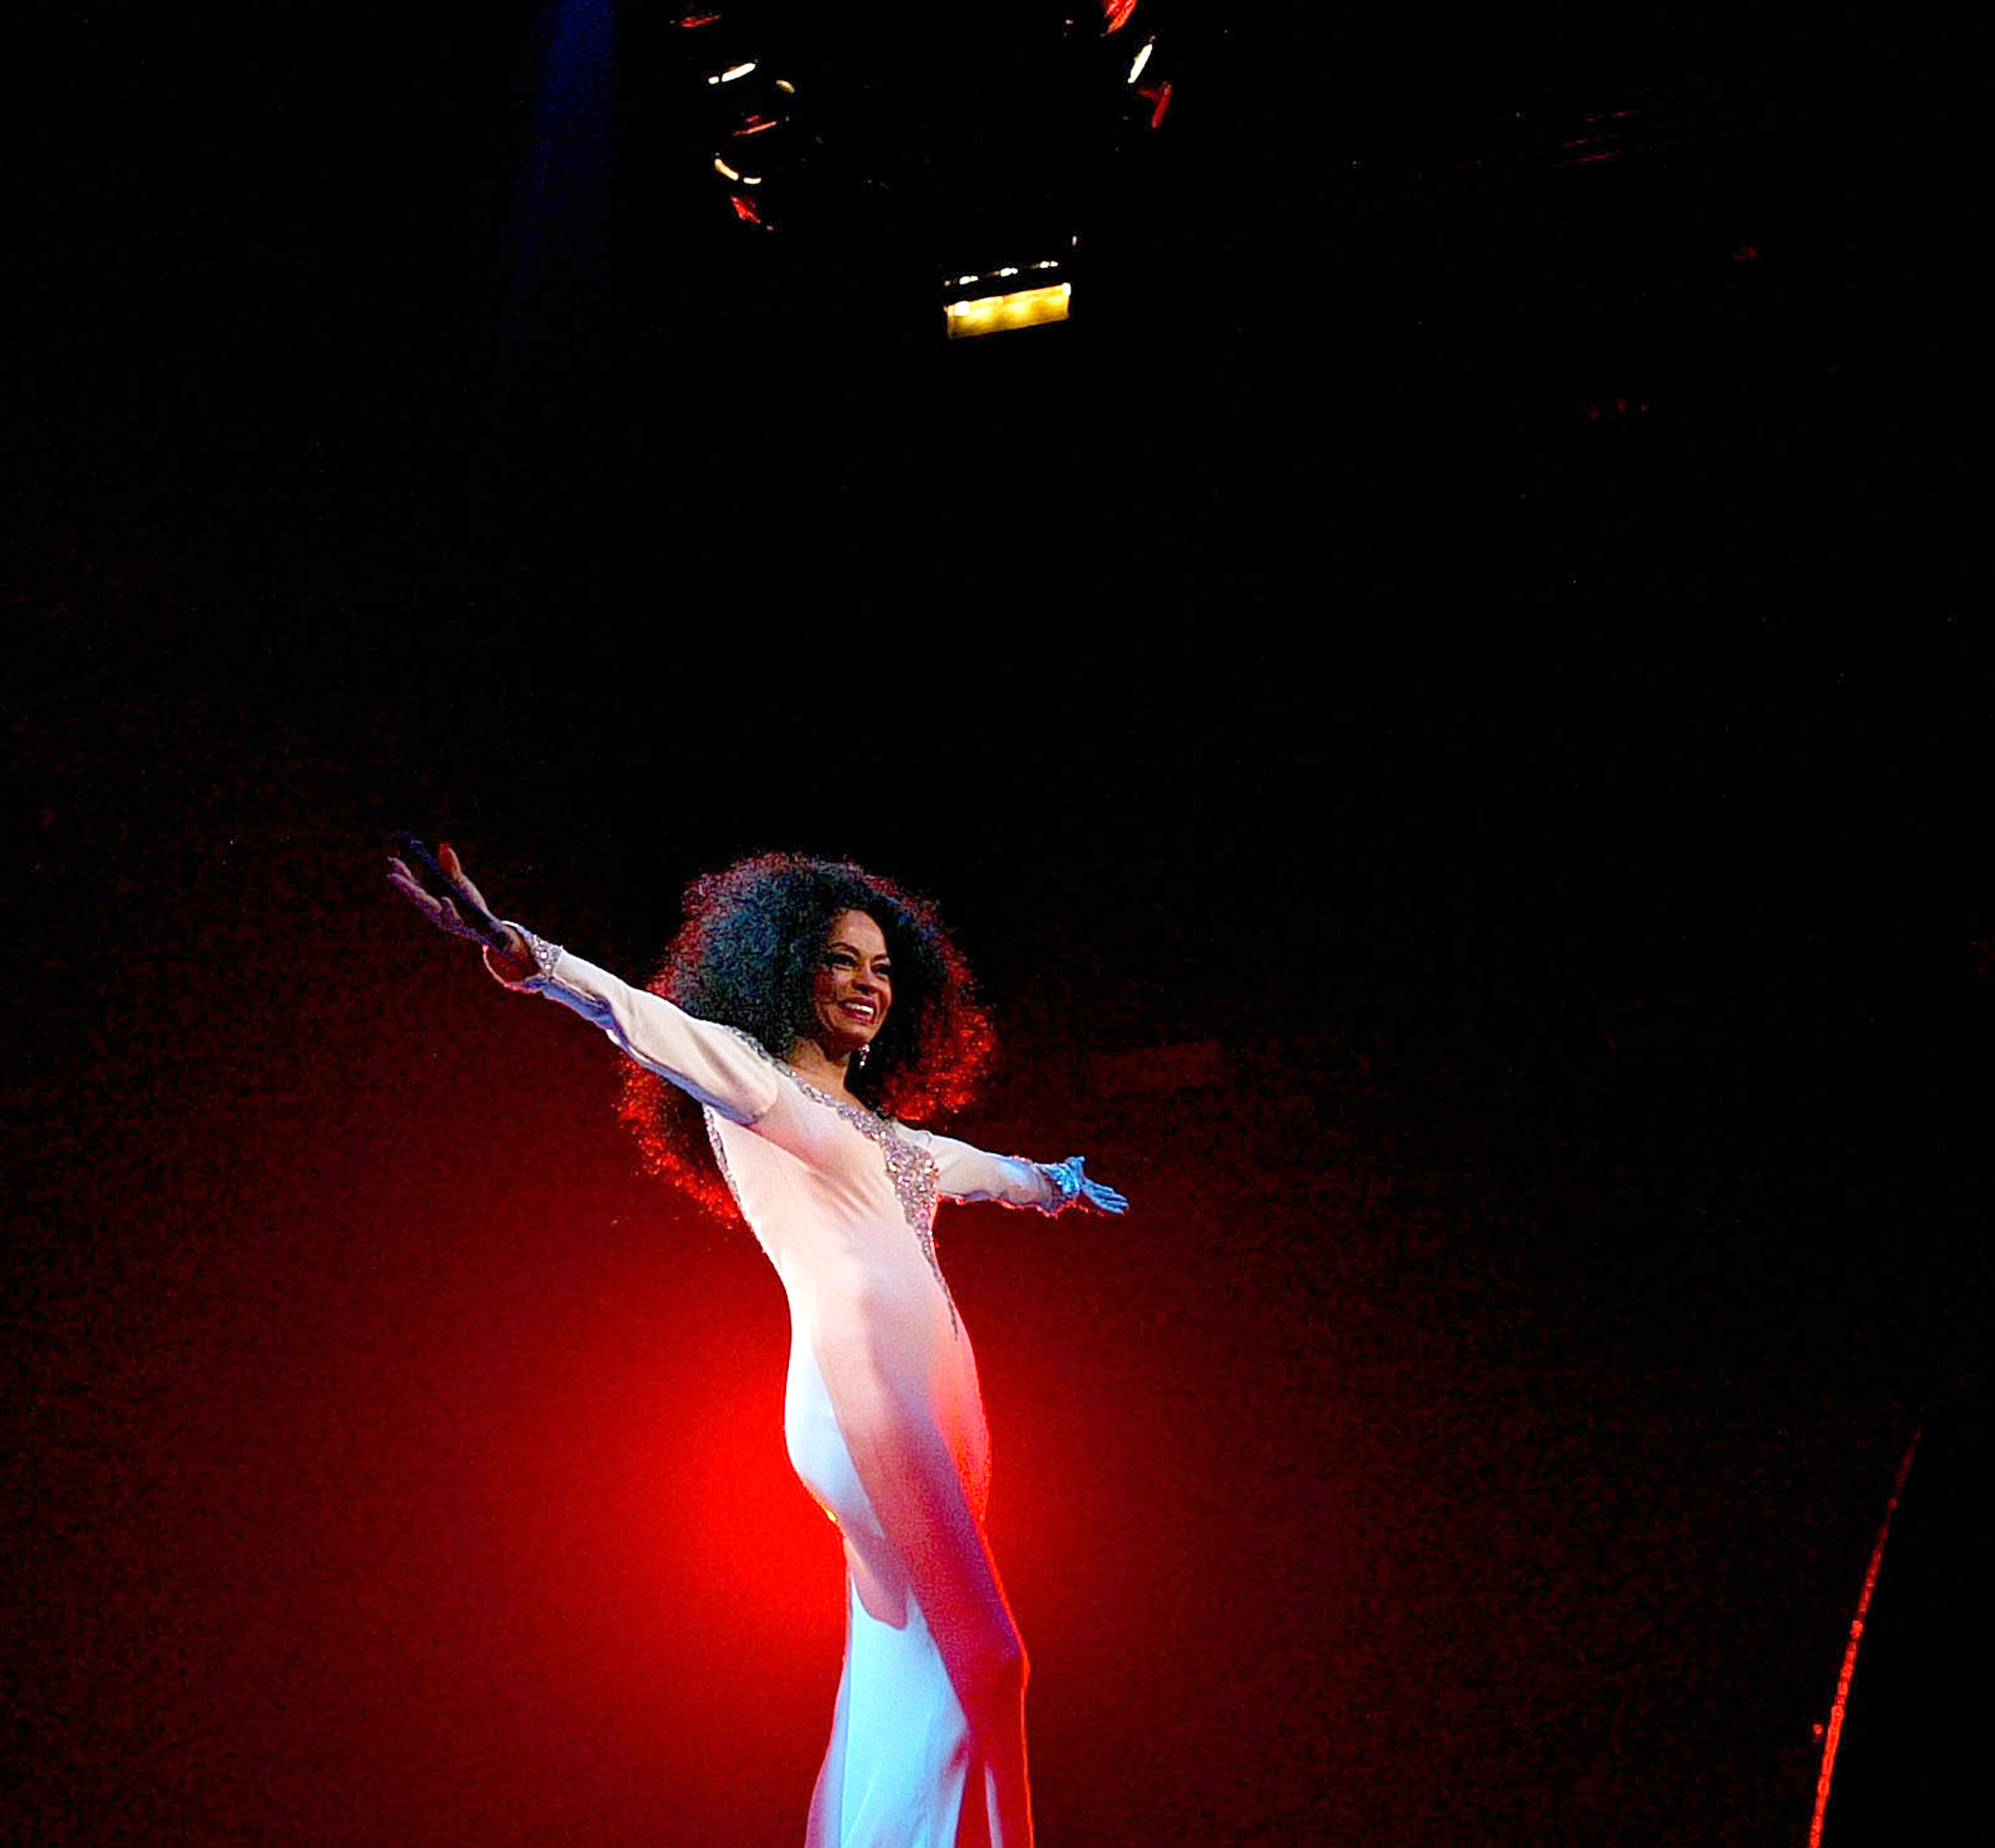 Diana Ross during Diana Ross in Concert at Wembley Arena in London on March 18, 2004.